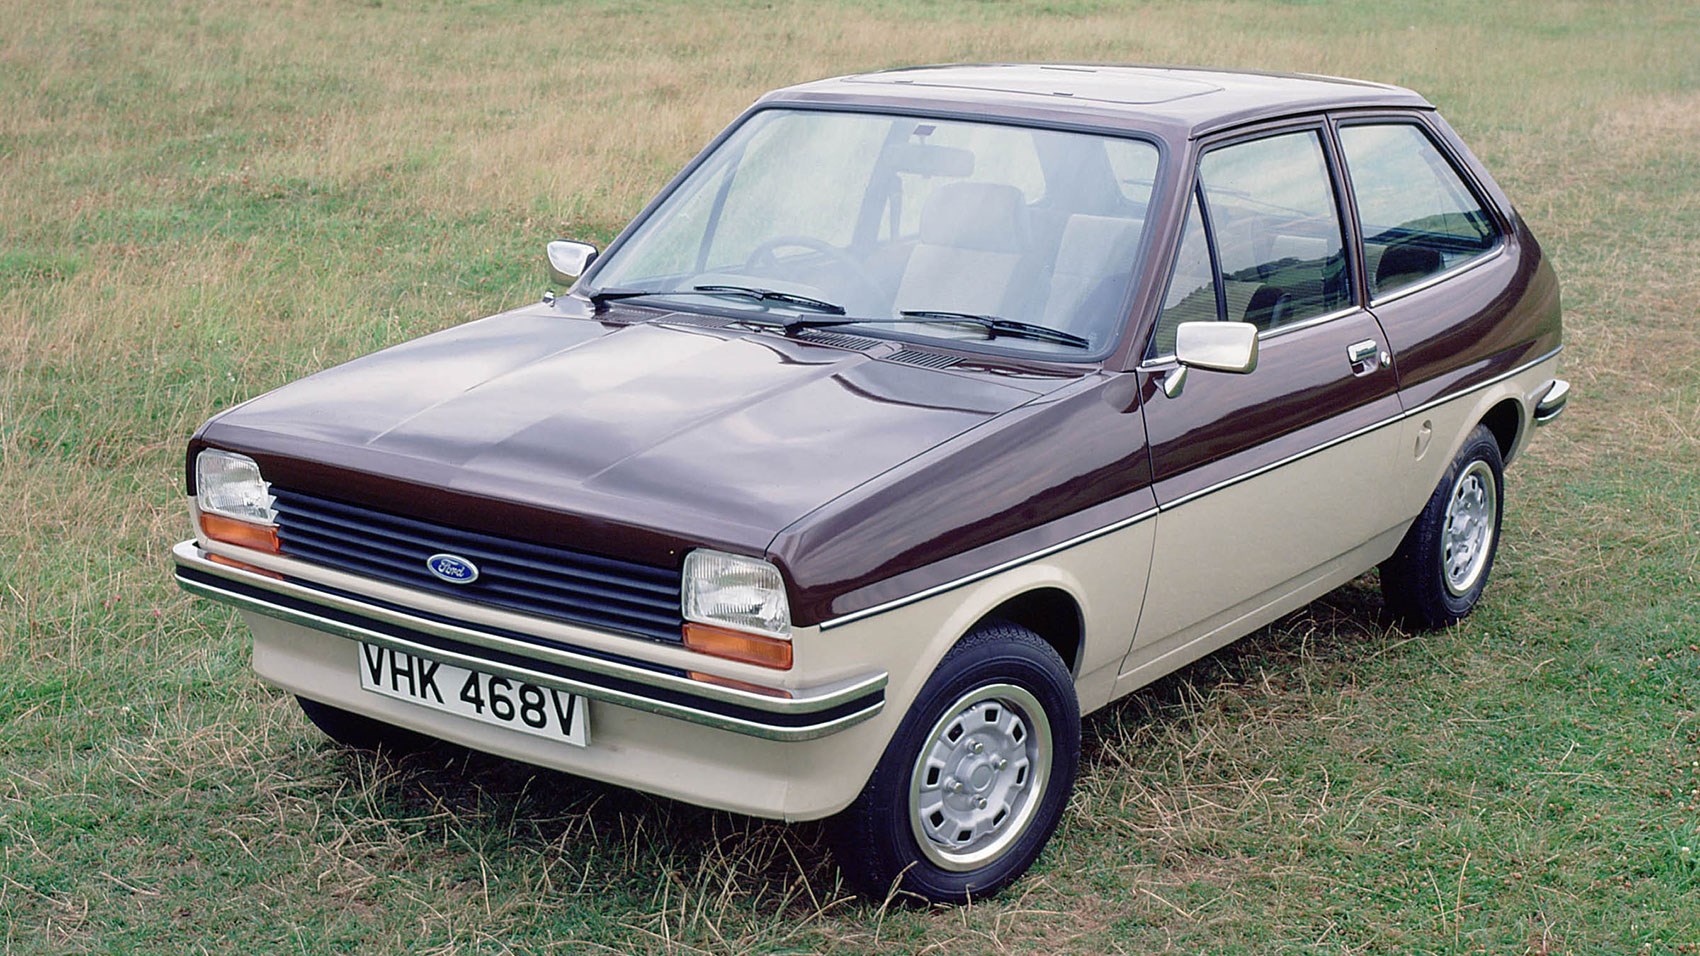 Ford Fiesta through the years: the ups and downs of the Blue